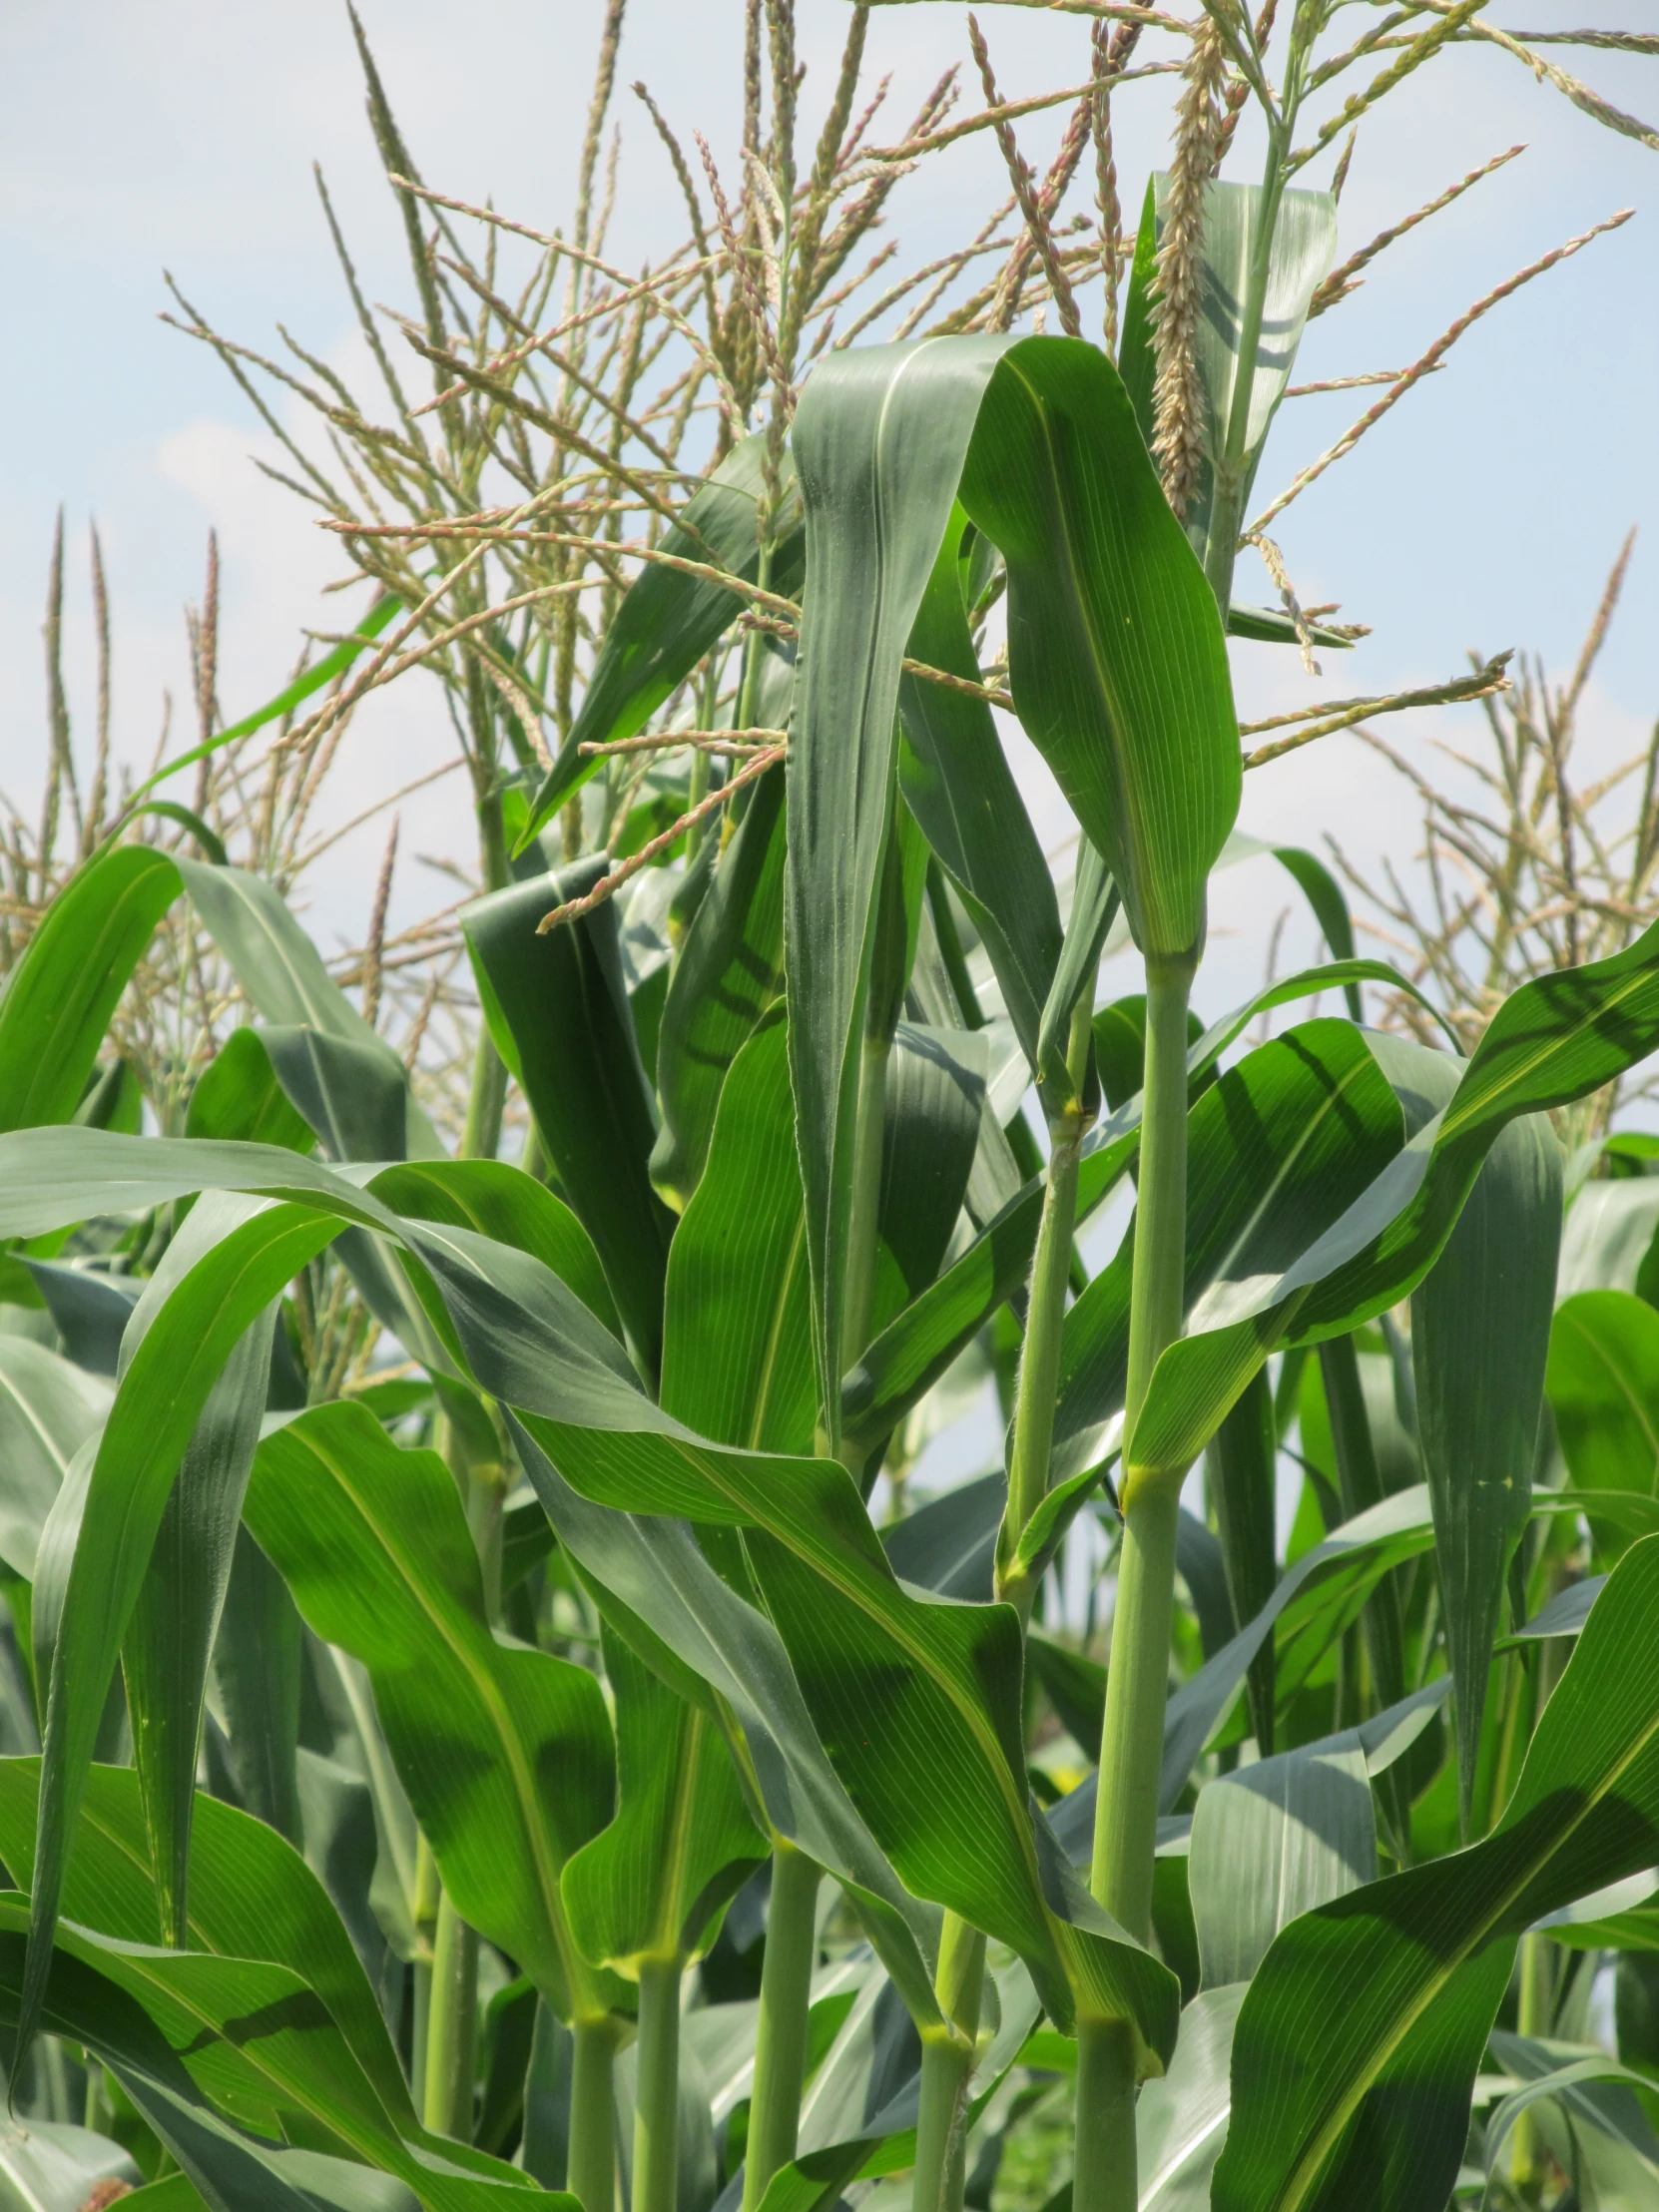 the leaves and stems of a corn cob are in focus